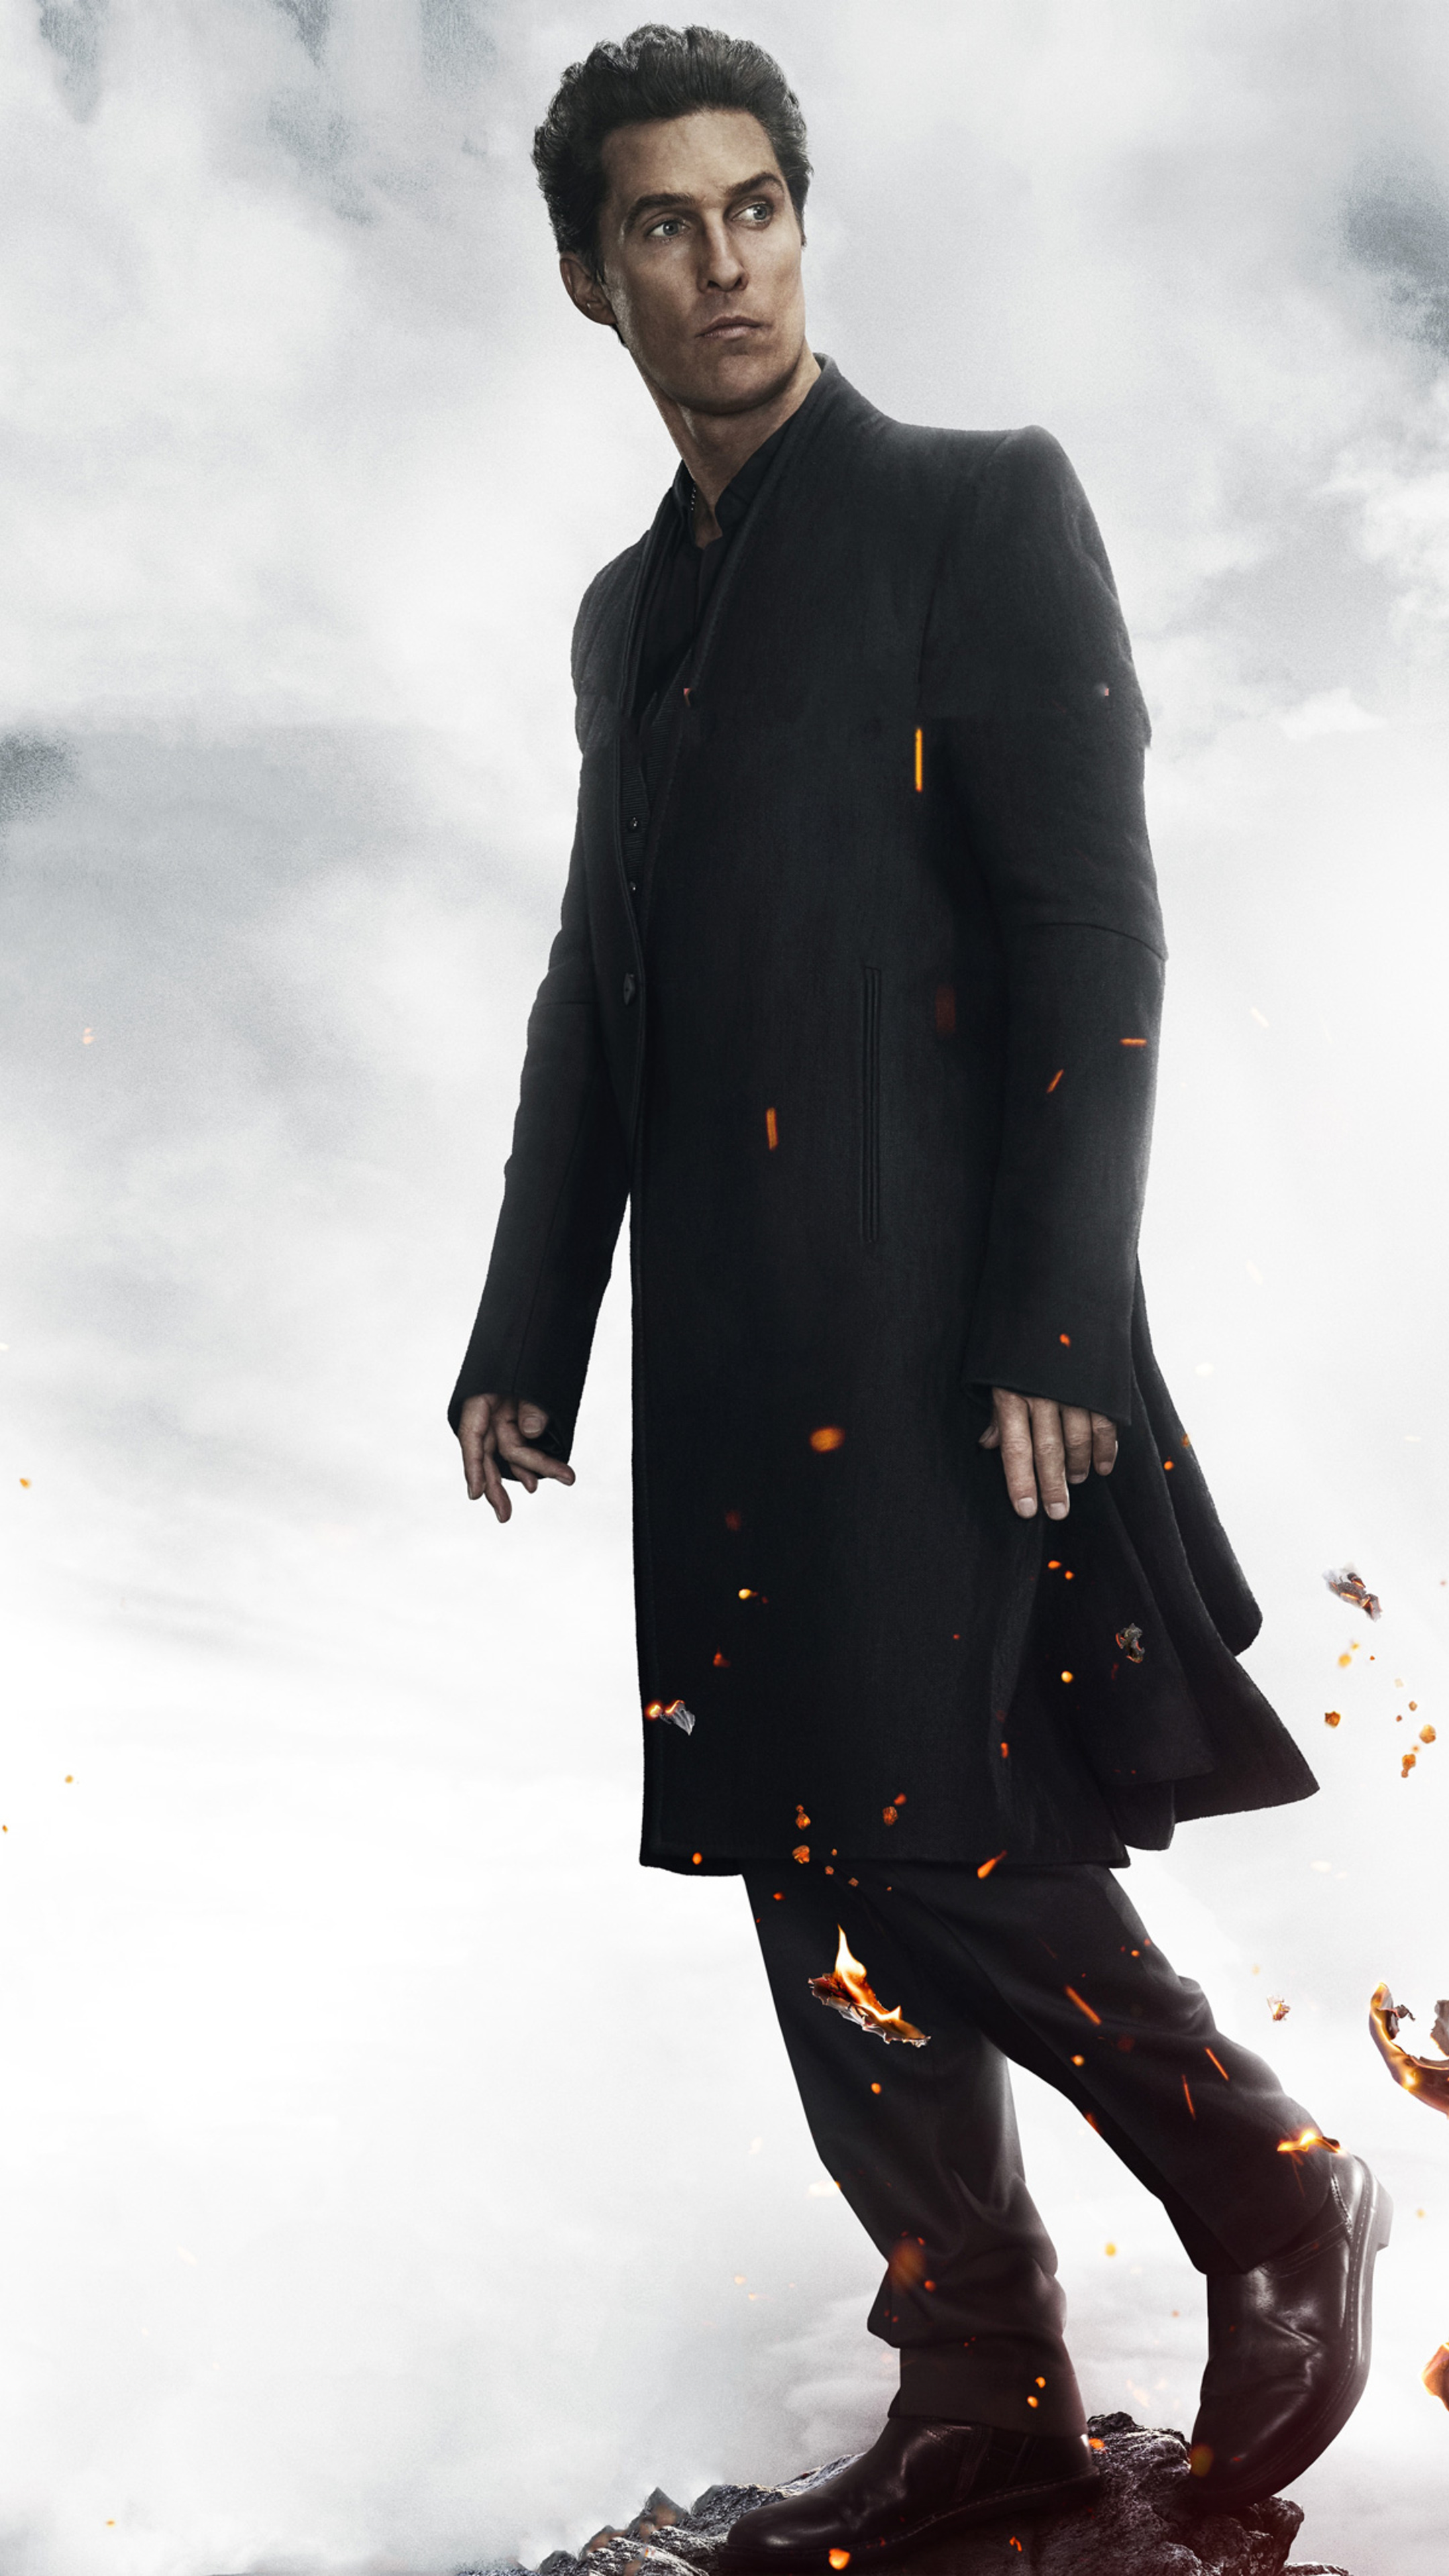 Matthew McConaughey: The Dark Tower, Walter Padick, a ruthless ageless deceiver and sorcerer. 2160x3840 4K Wallpaper.